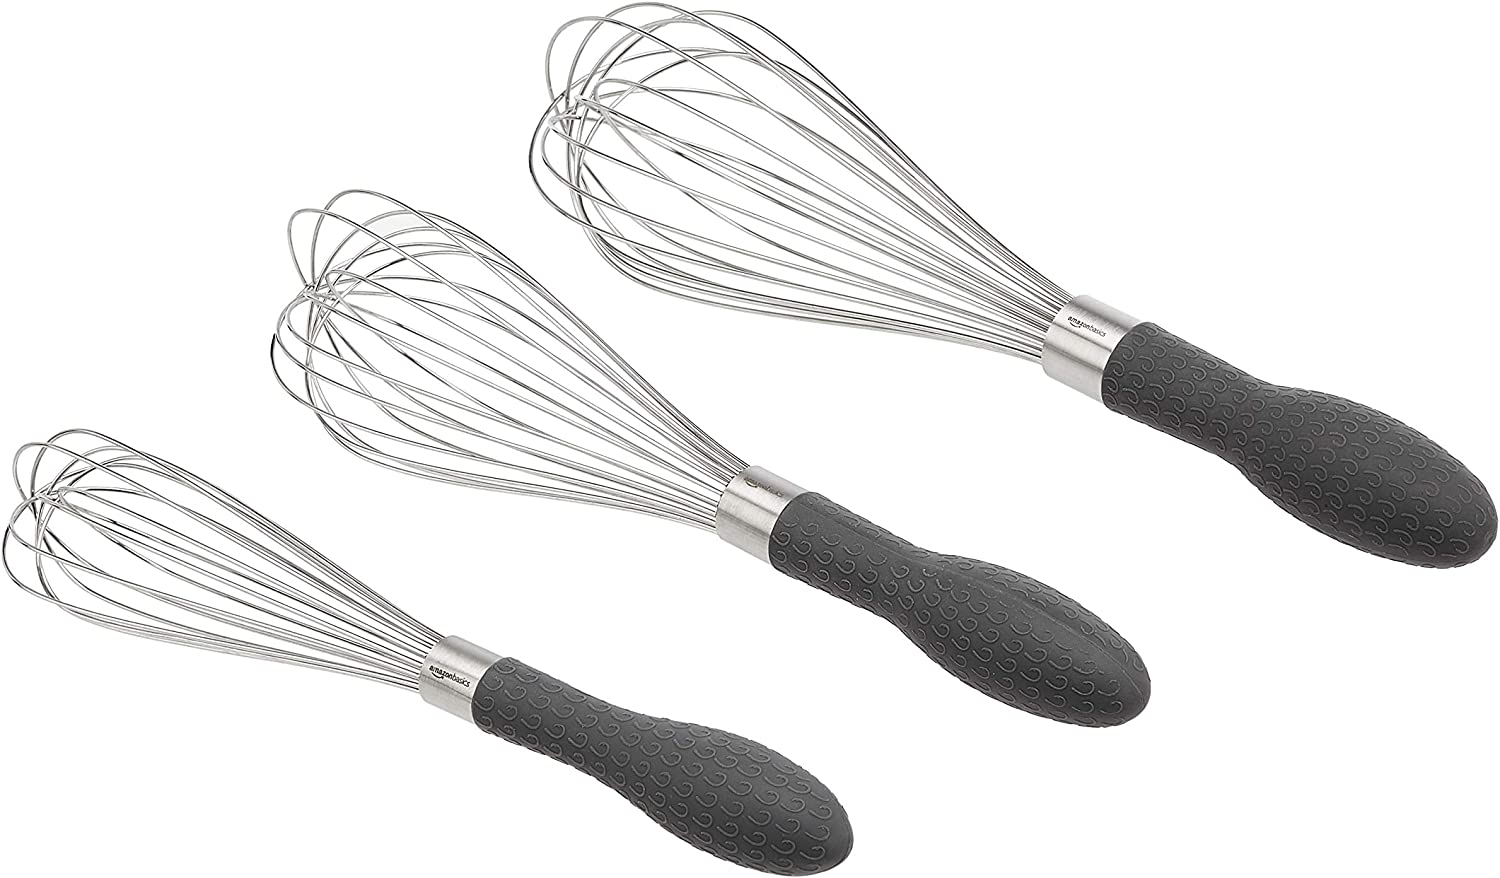 Whisk for mixing